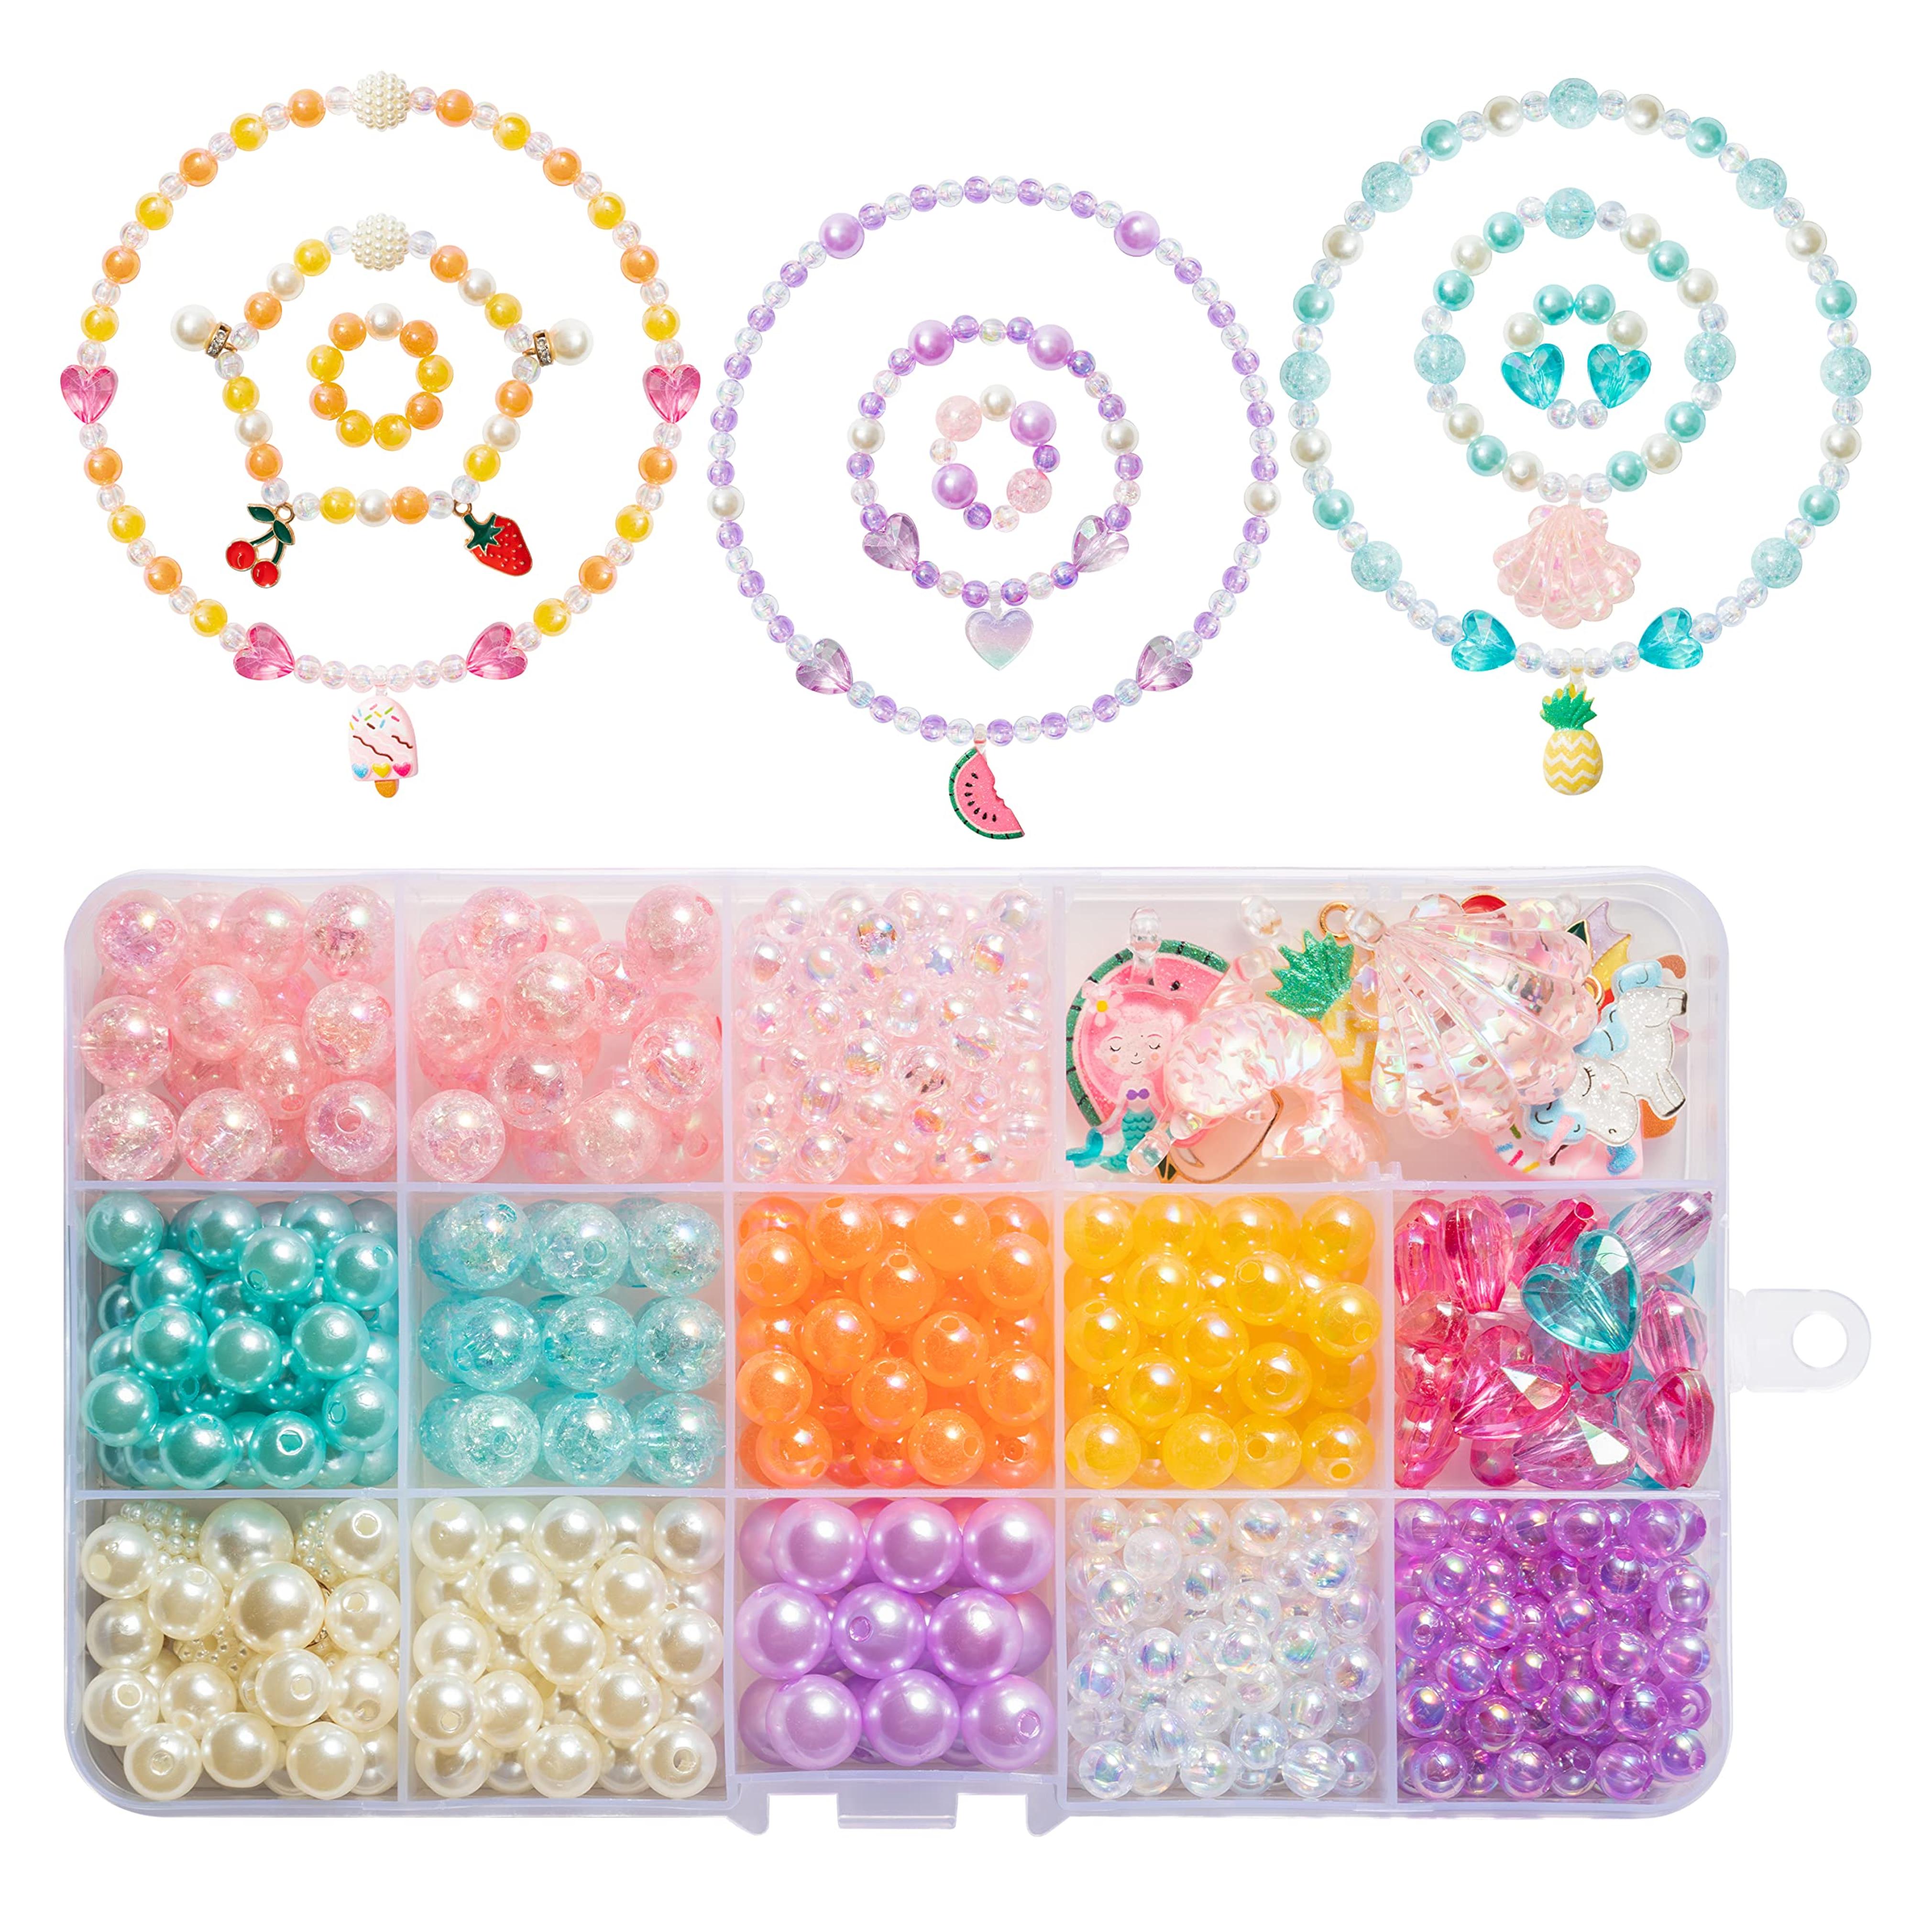 OSNIE Summer DIY Bead Jewelry Making Kit for Kids Girls with Watermelon Pineapple Ice Cream Strawberry Peach Cherry Y2K Beads and Charms for Bracelets Rings Necklaces Creativity Art Crafts, 400Pcs+